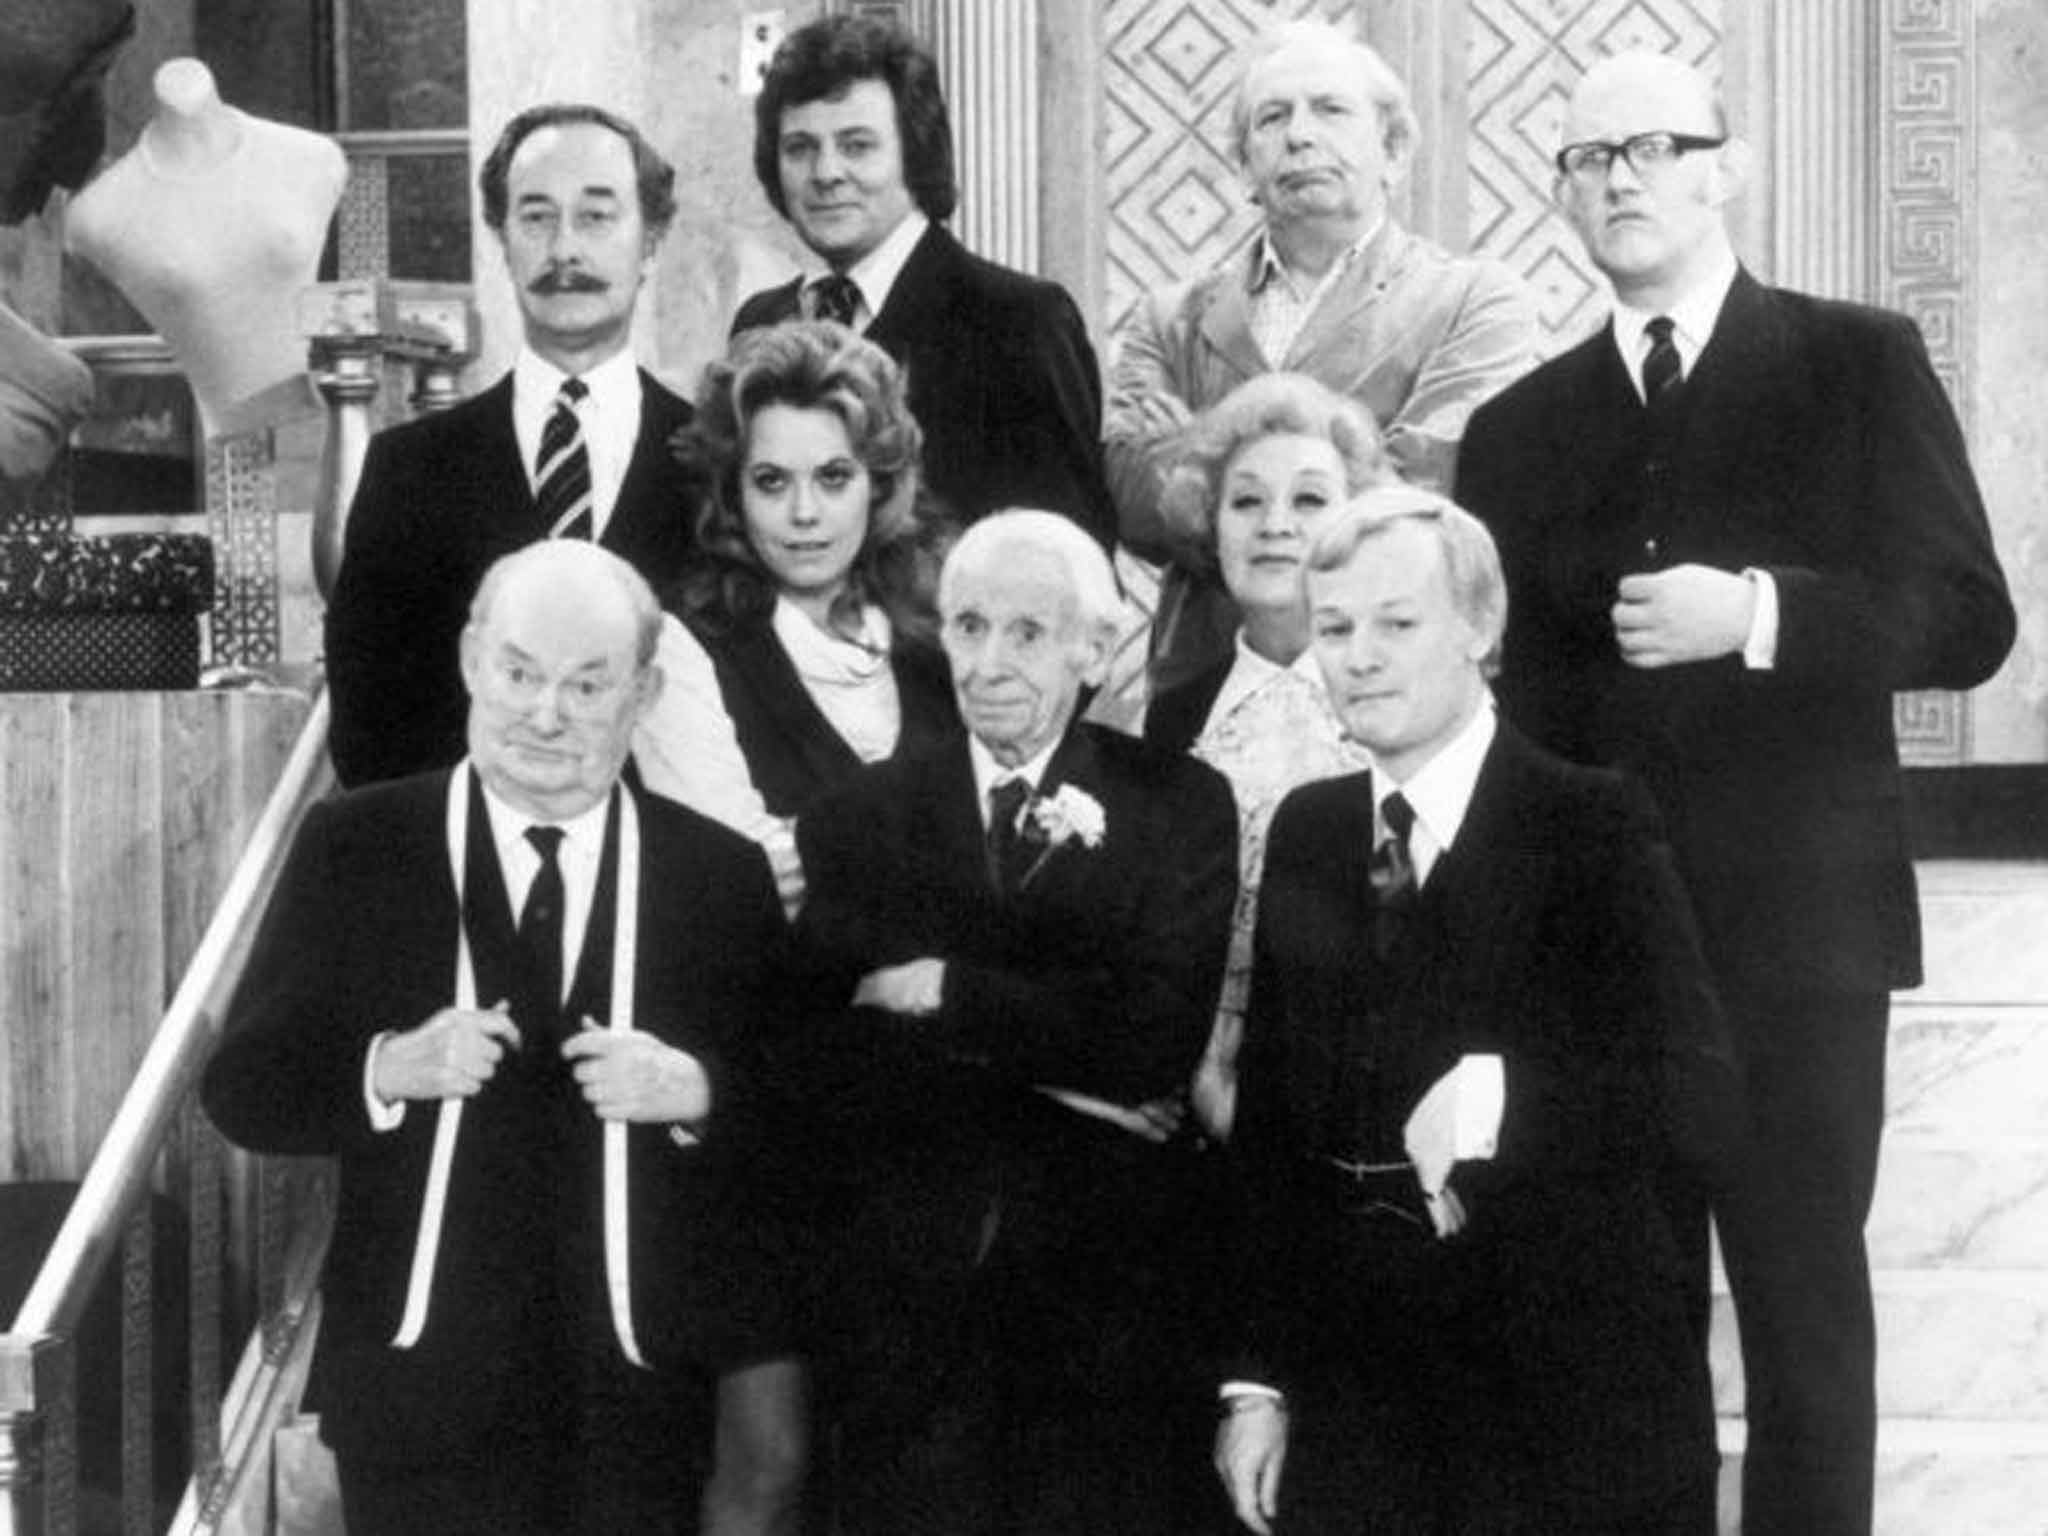 Smith, far right, with the staff of Grace Brothers: he was the last surviving main cast member